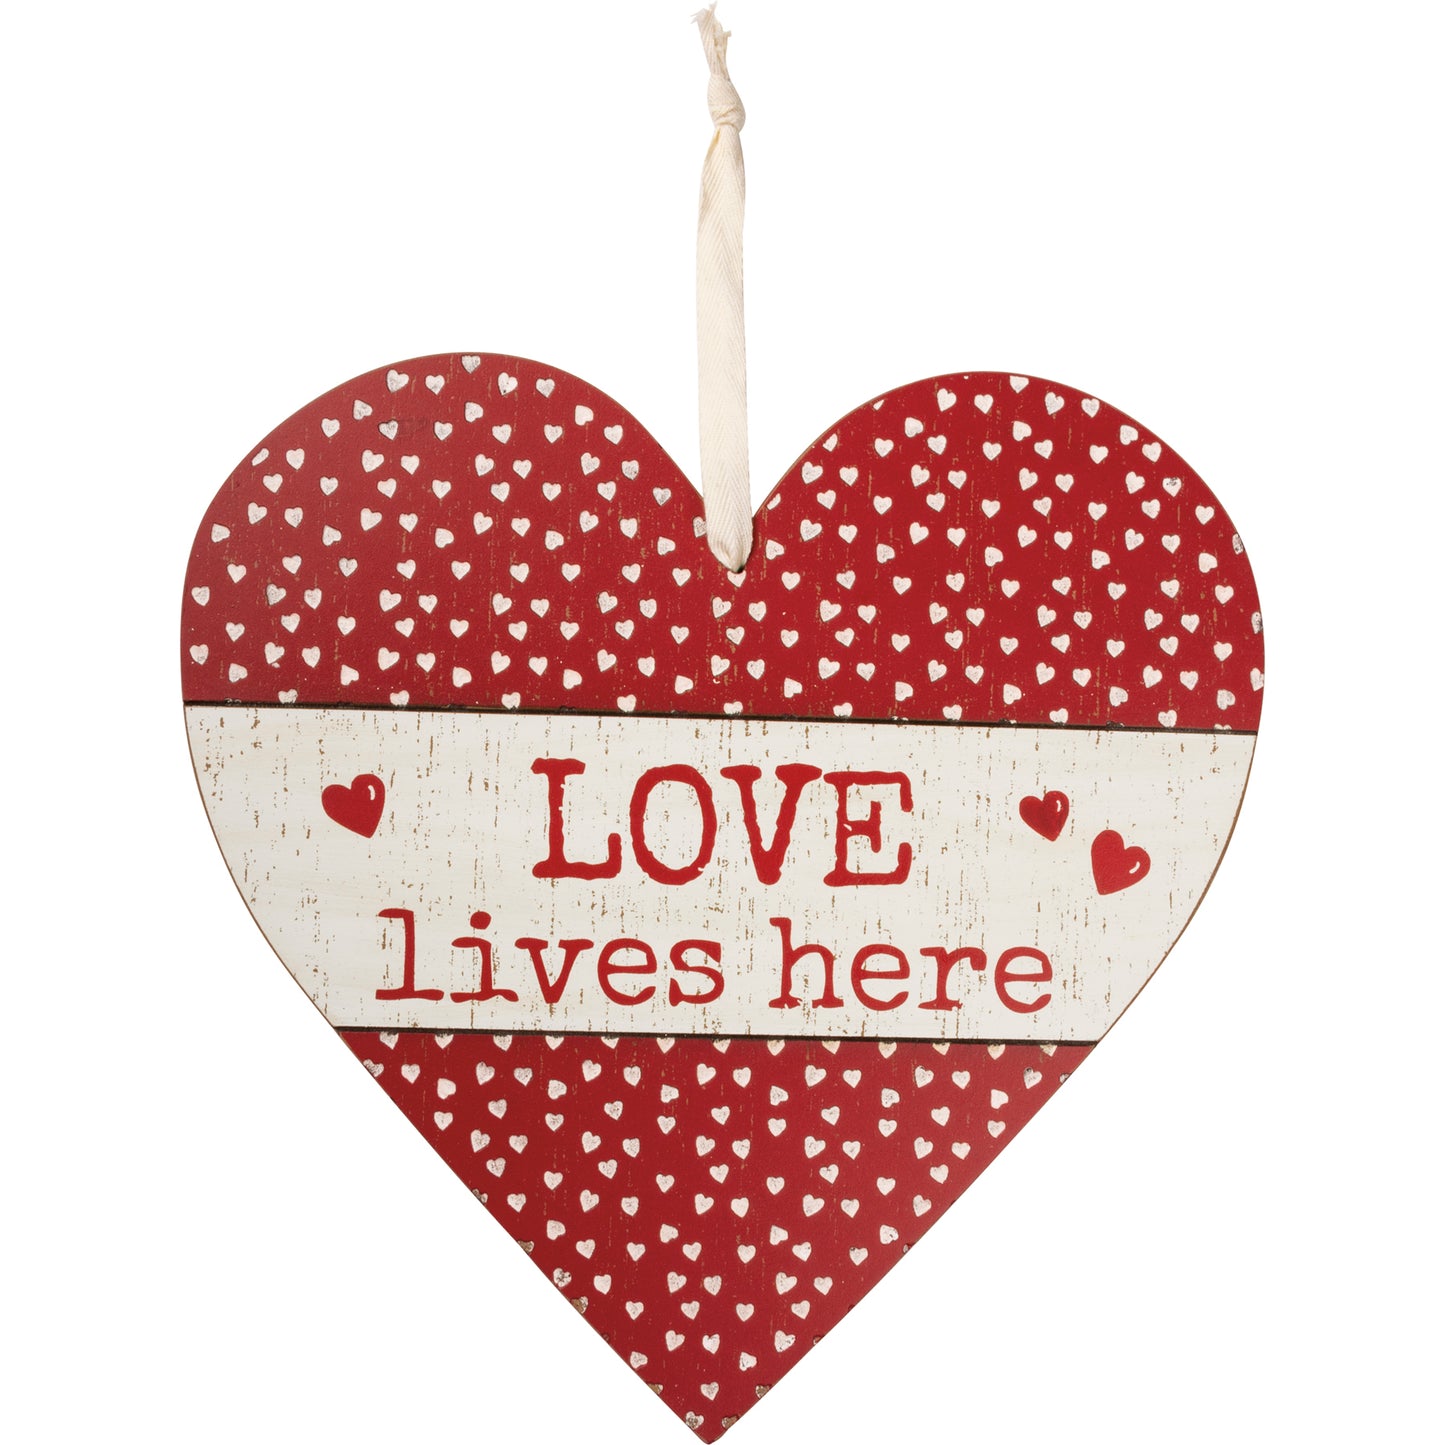 "Love lives Here" - Wall decor